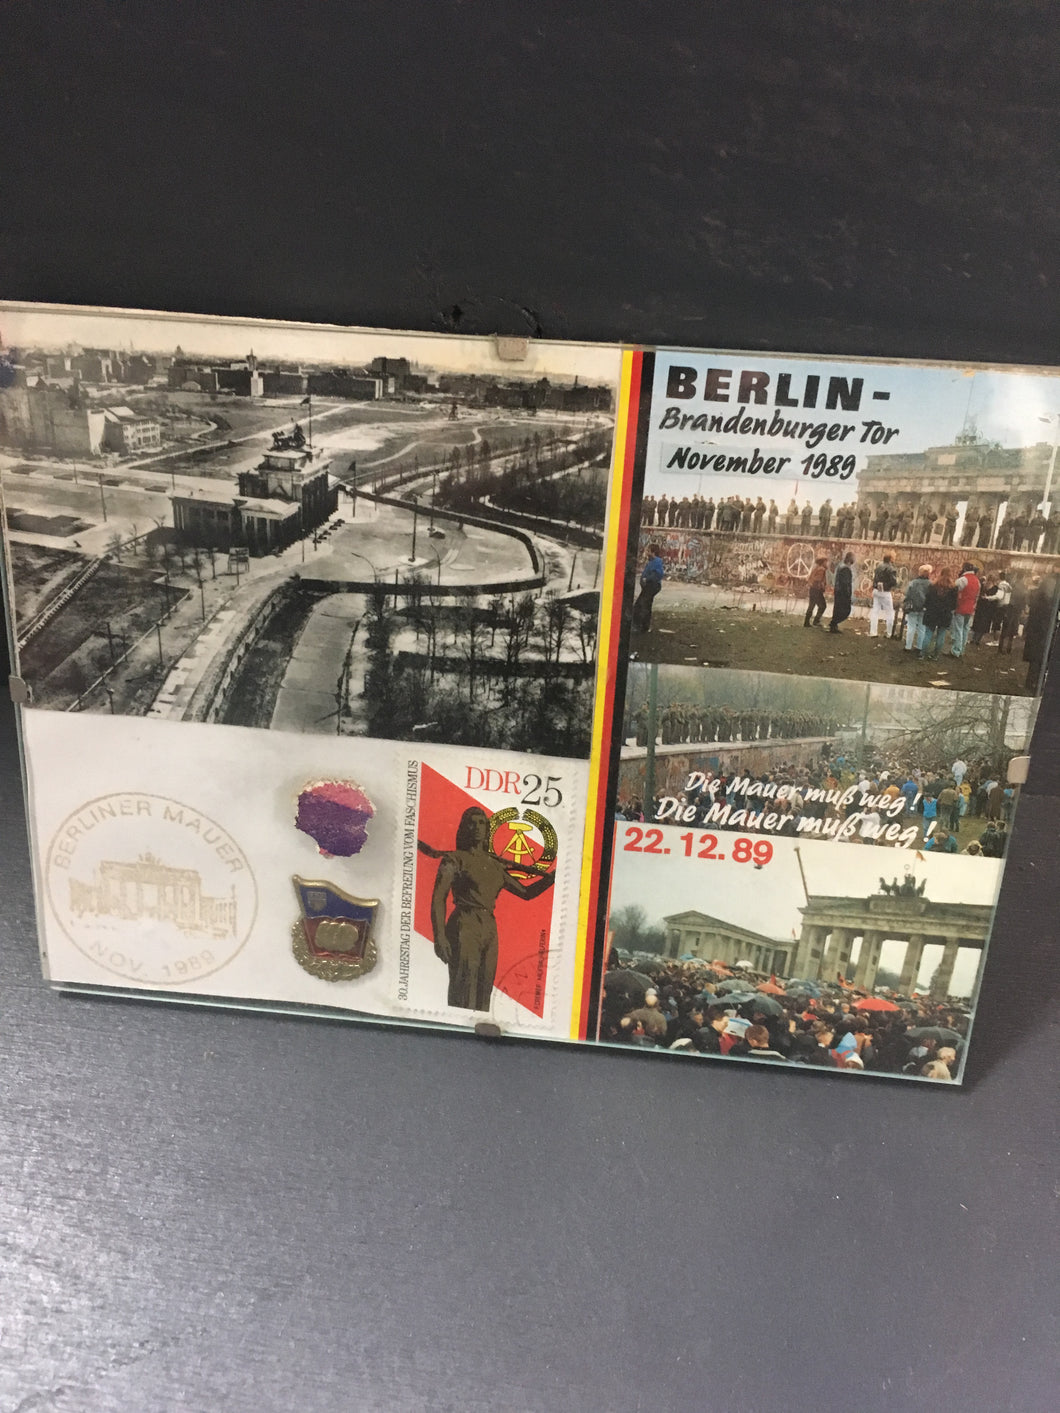 Unique 1989 Display Commemorating the Fall of the Berlin Wall!